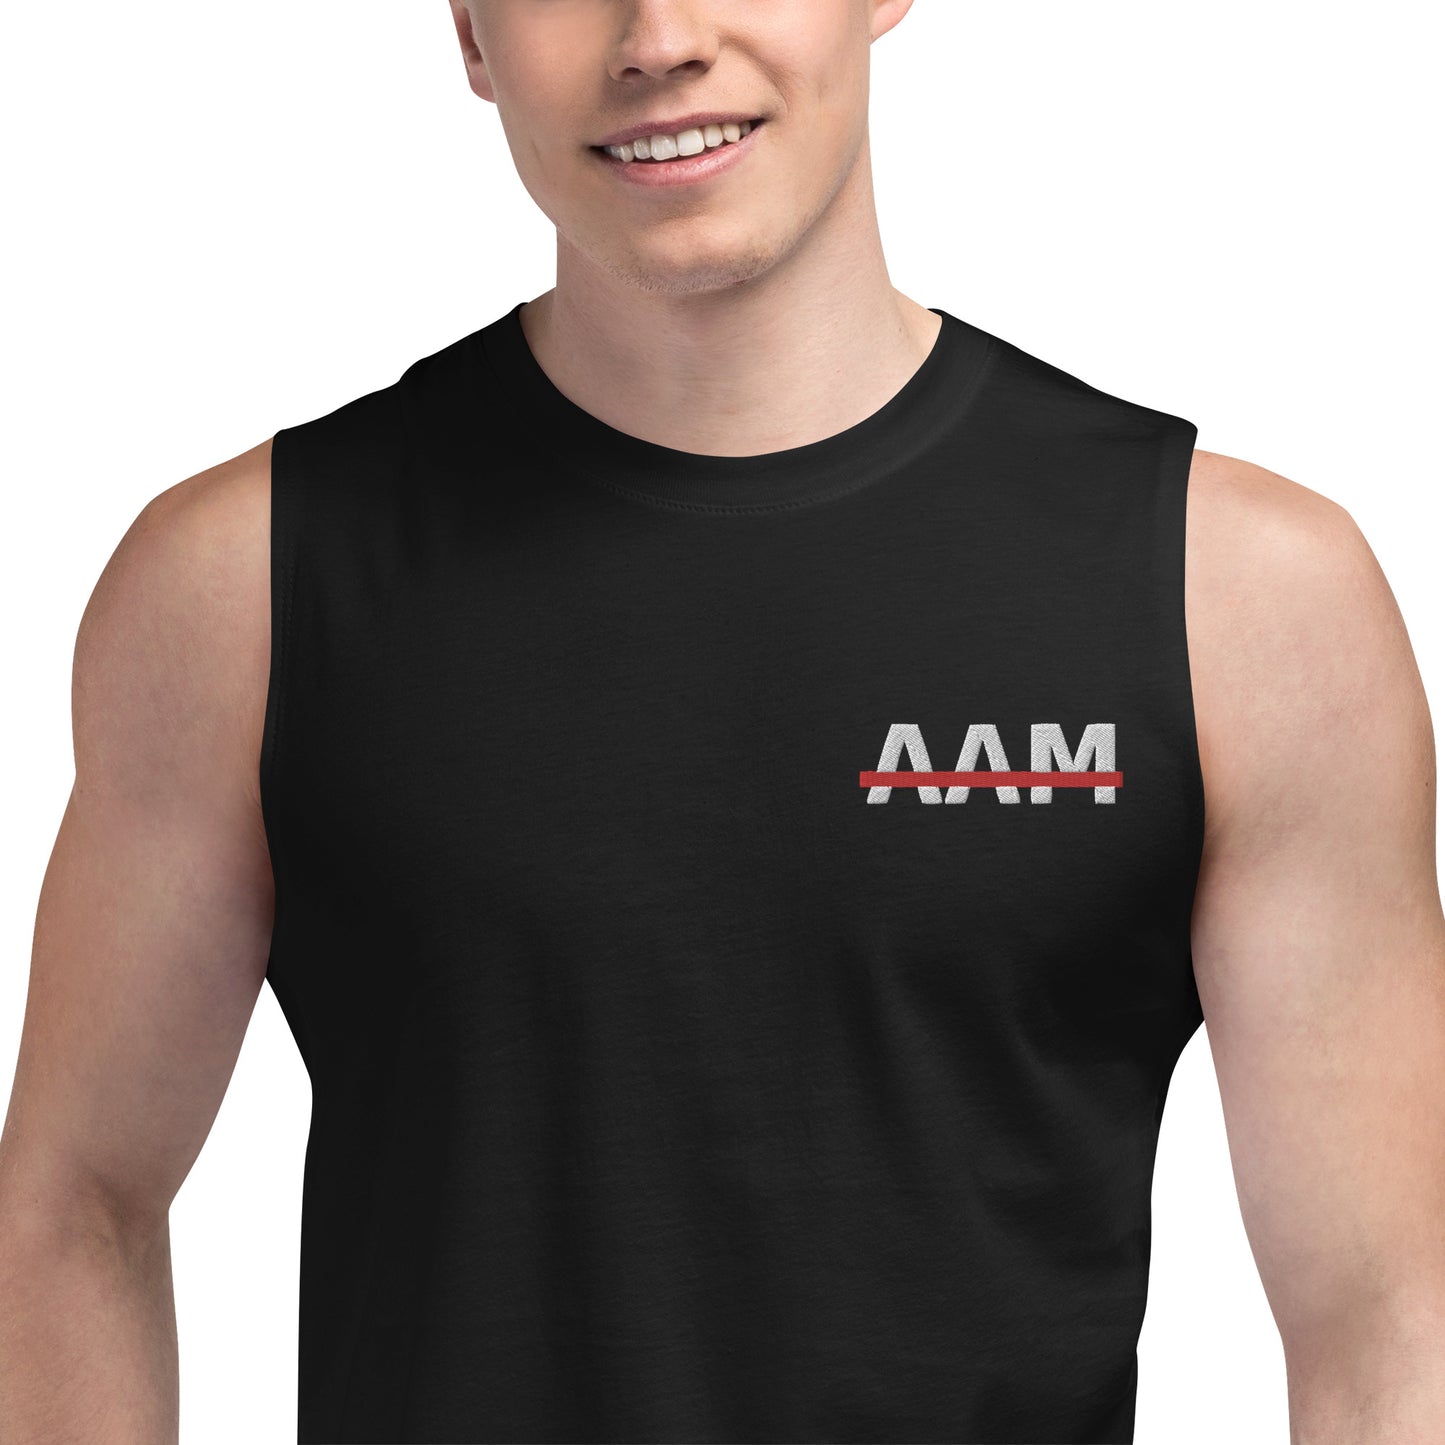 AAM Embroidered Muscle Shirt